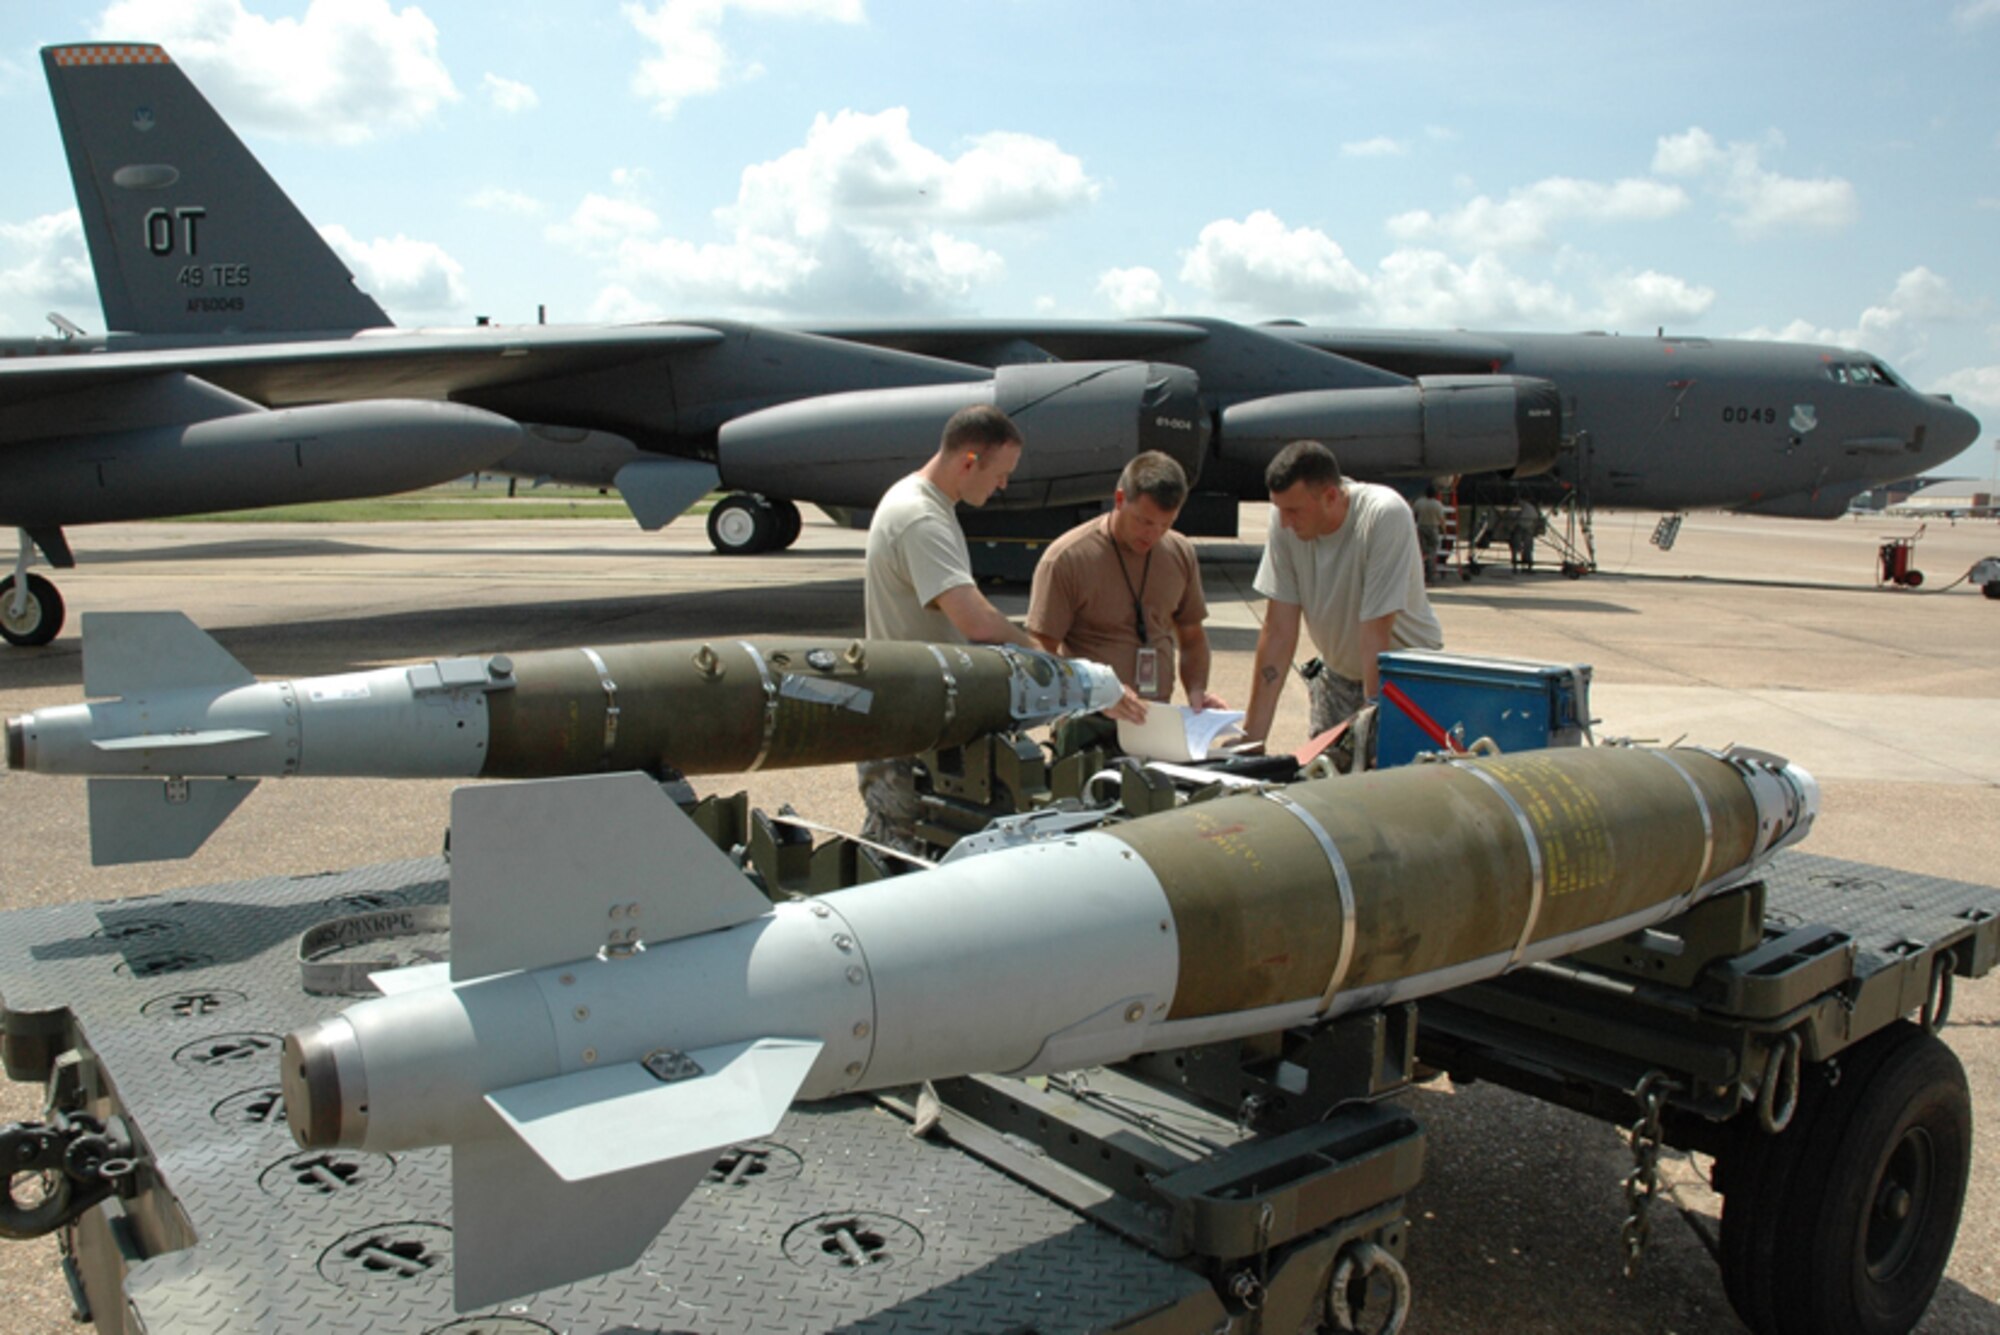 Staff Sgt. John Robertson, Tech Sgt. Allan Weigold, 49th Test and Evaluation Squadron, and Staff Sgt. Norman Startzel, 2nd Bomb Wing, plan their movements before loading two Laser Joint Direct Attack Munitions onto a B-52 from the 49th Test and Evaluation Squadron at Barksdale Air Force Base, La., July 10. The 49th TES demonstrated the B-52's LJDAM capability on a target on the after a cross country flight. The target was stationary, but the 49th plans to demonstrate the LJDAM on a moving target soon. The laser piece of the munition allows for updated targeting and adjustments to moving targets. Photo by Boeing. 